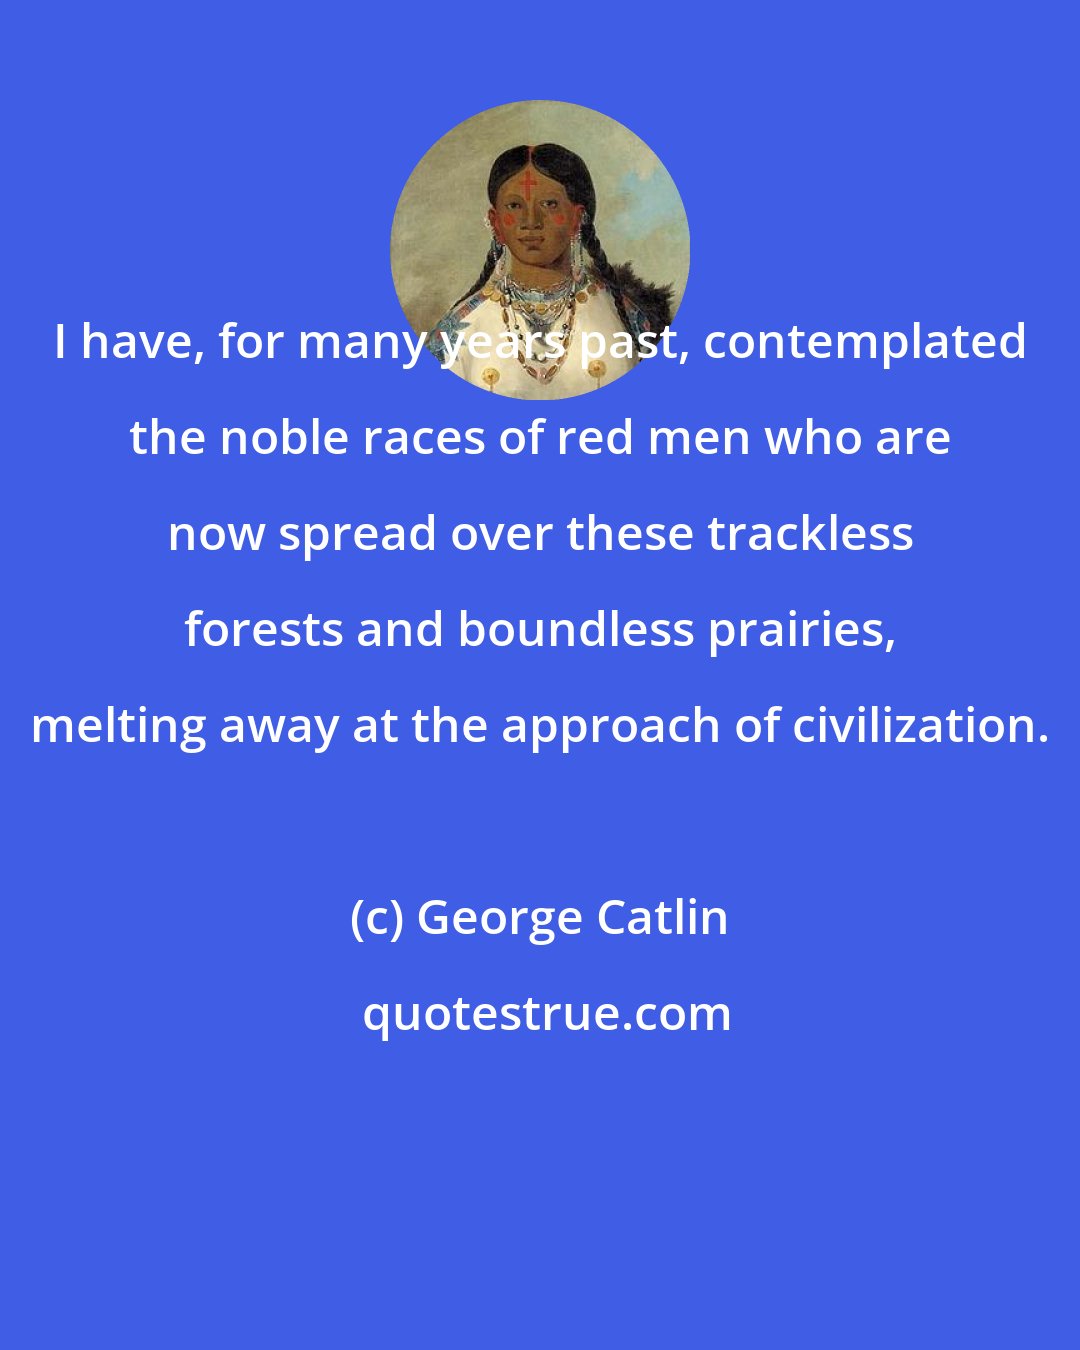 George Catlin: I have, for many years past, contemplated the noble races of red men who are now spread over these trackless forests and boundless prairies, melting away at the approach of civilization.